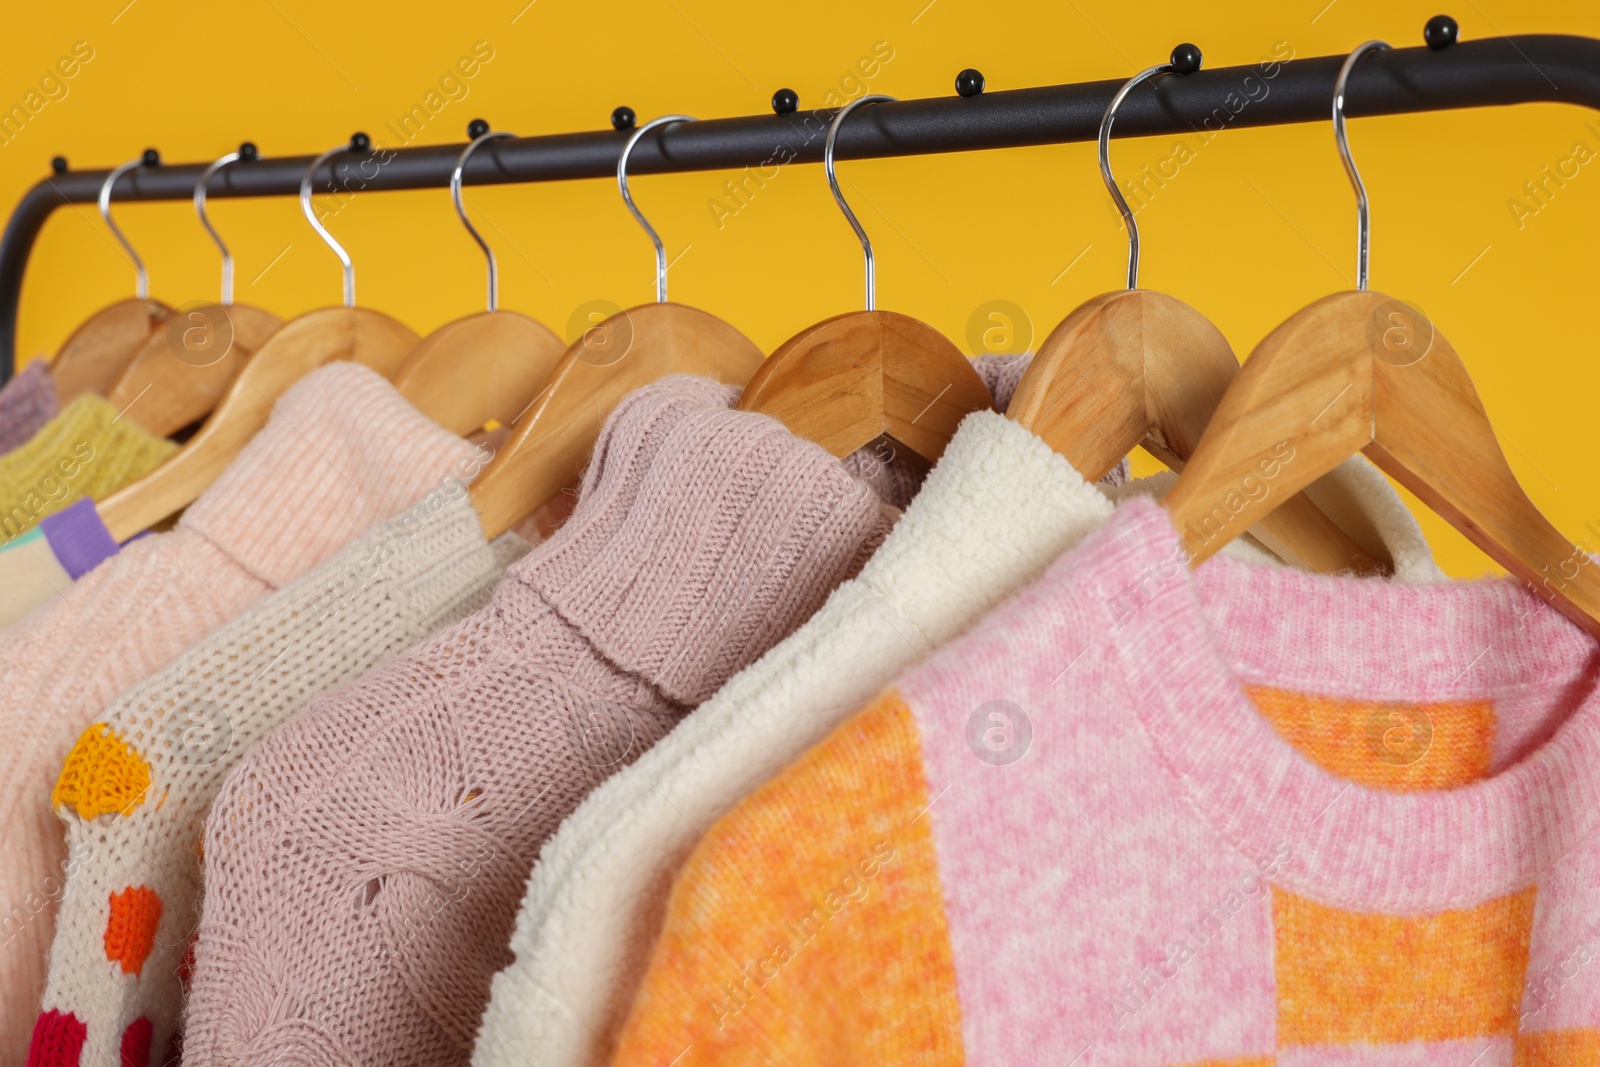 Photo of Rack with stylish women's sweaters on wooden hangers against orange background, closeup